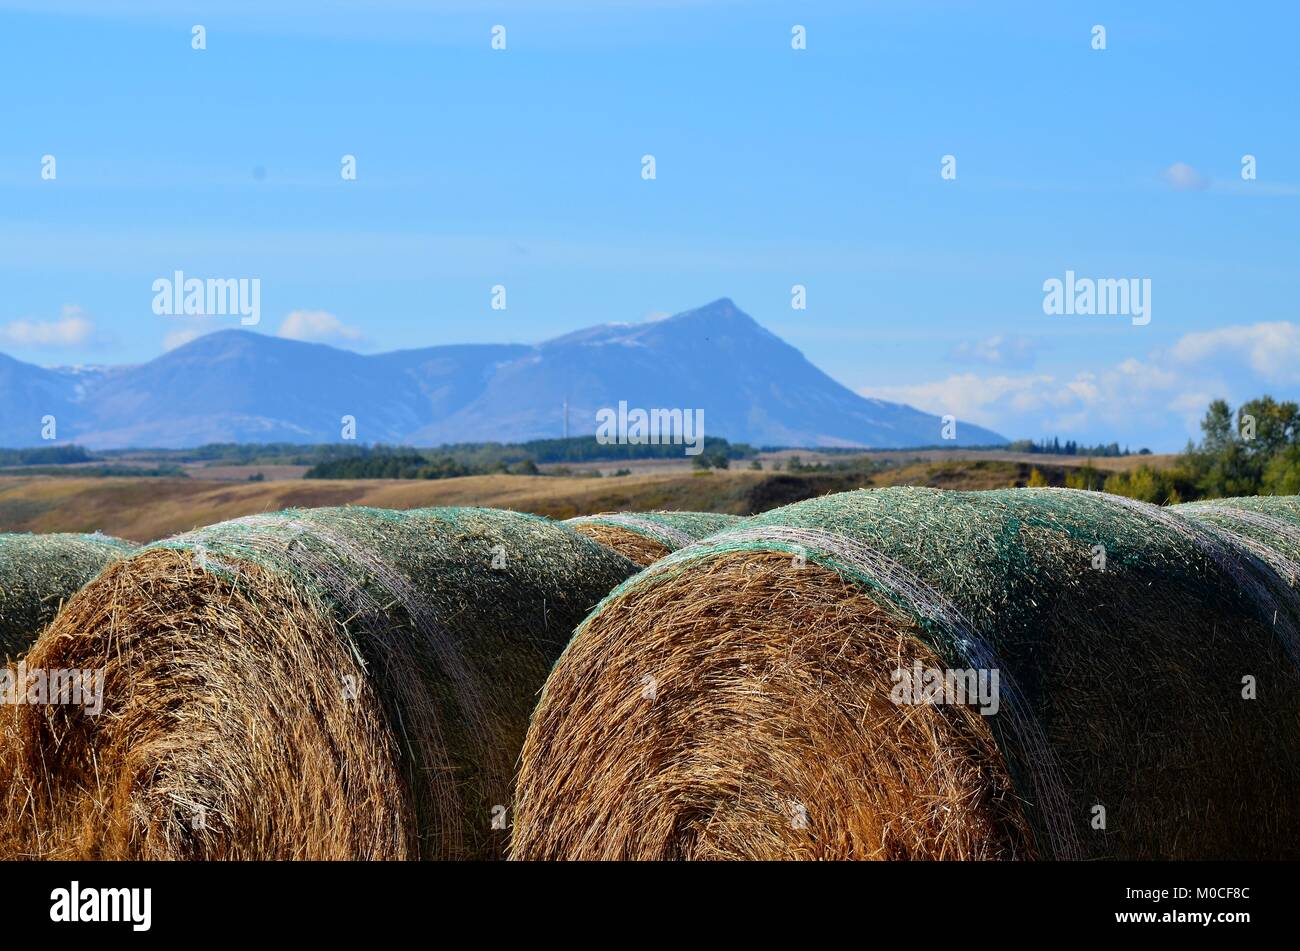 Rows of freshly harvested round hay bales sit in a farmers field with a wonderful view of the Rocky mountains in the distance Stock Photo